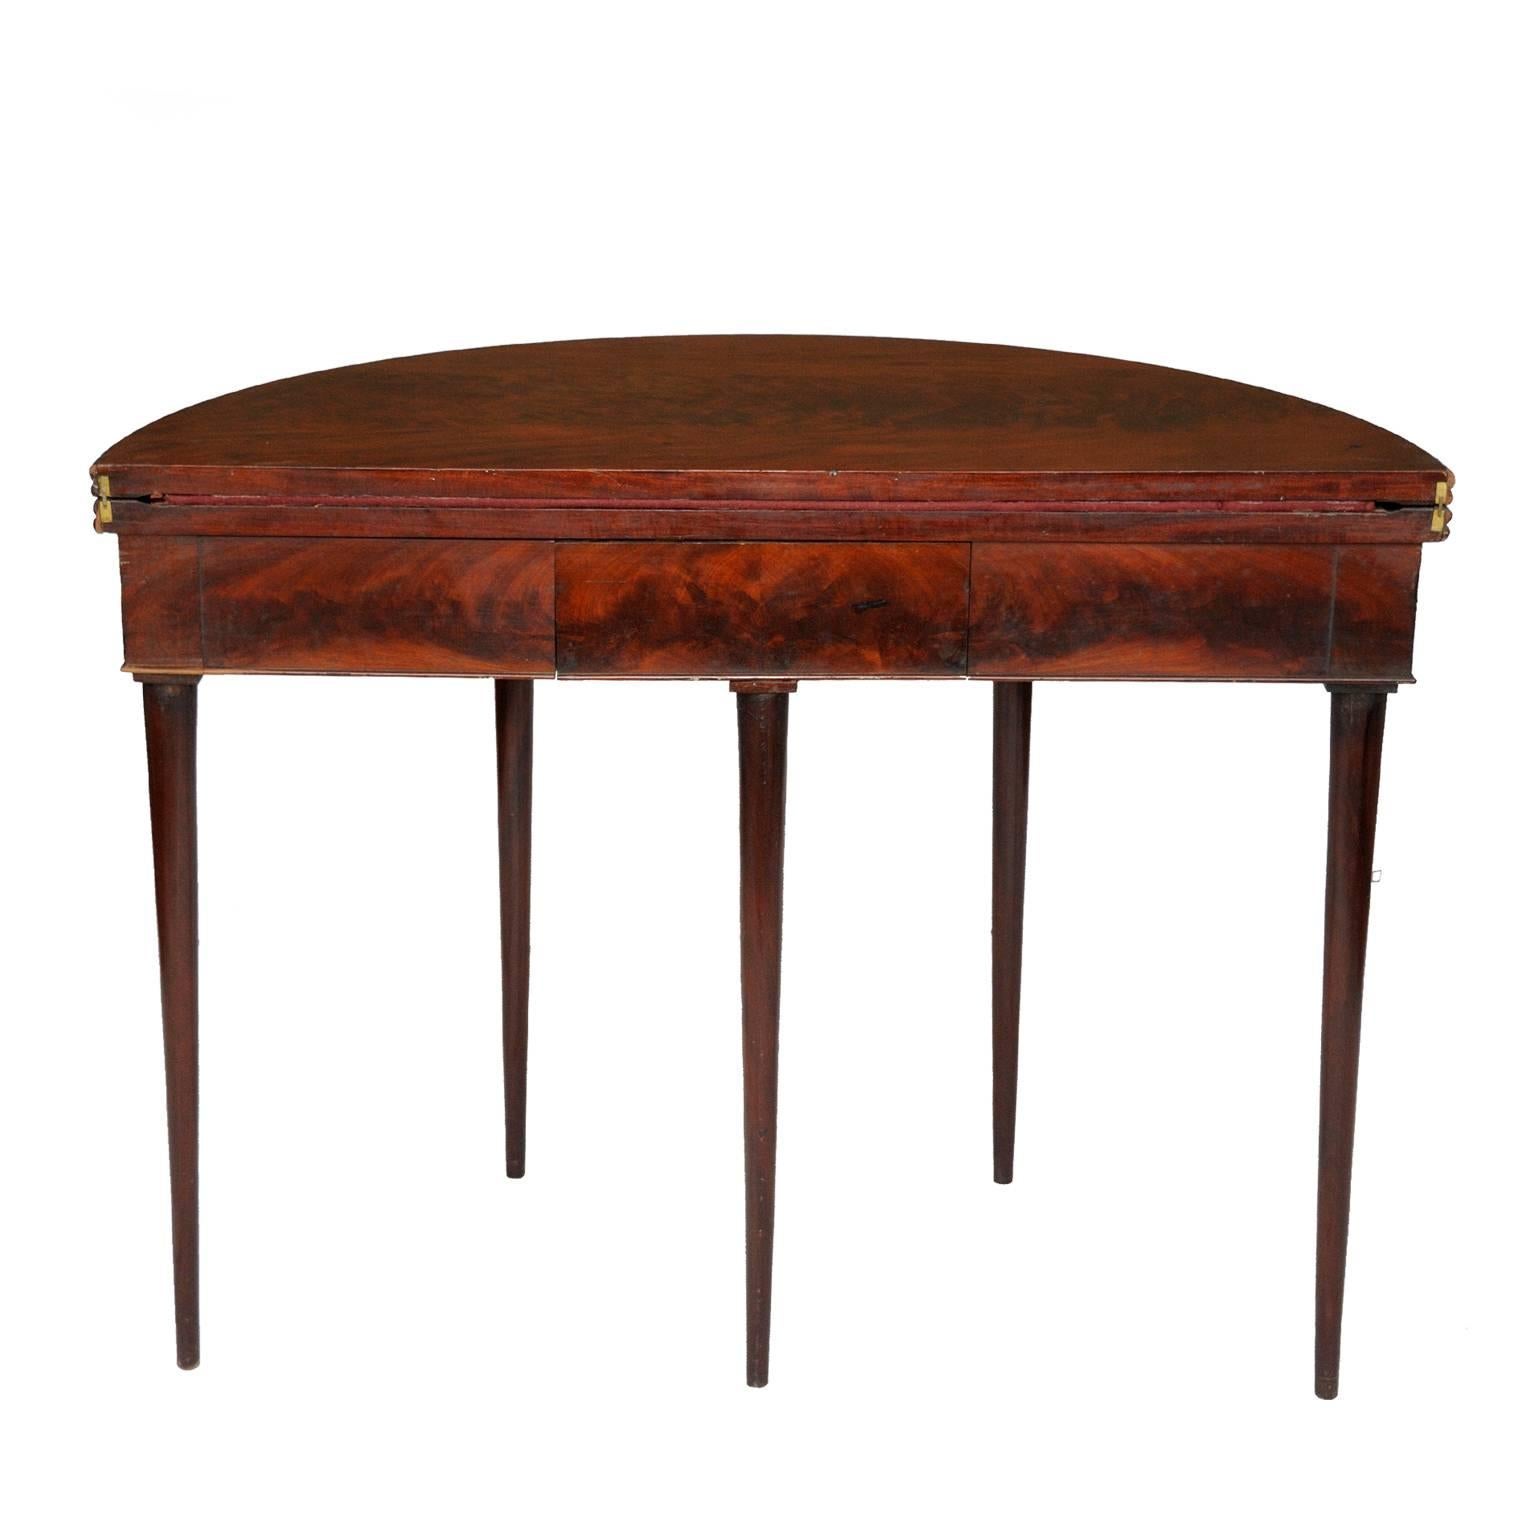 French 18th Century Louis XVI Flame Mahogany Circular Card Table, circa 1780 In Good Condition For Sale In Tetbury, Gloucestershire